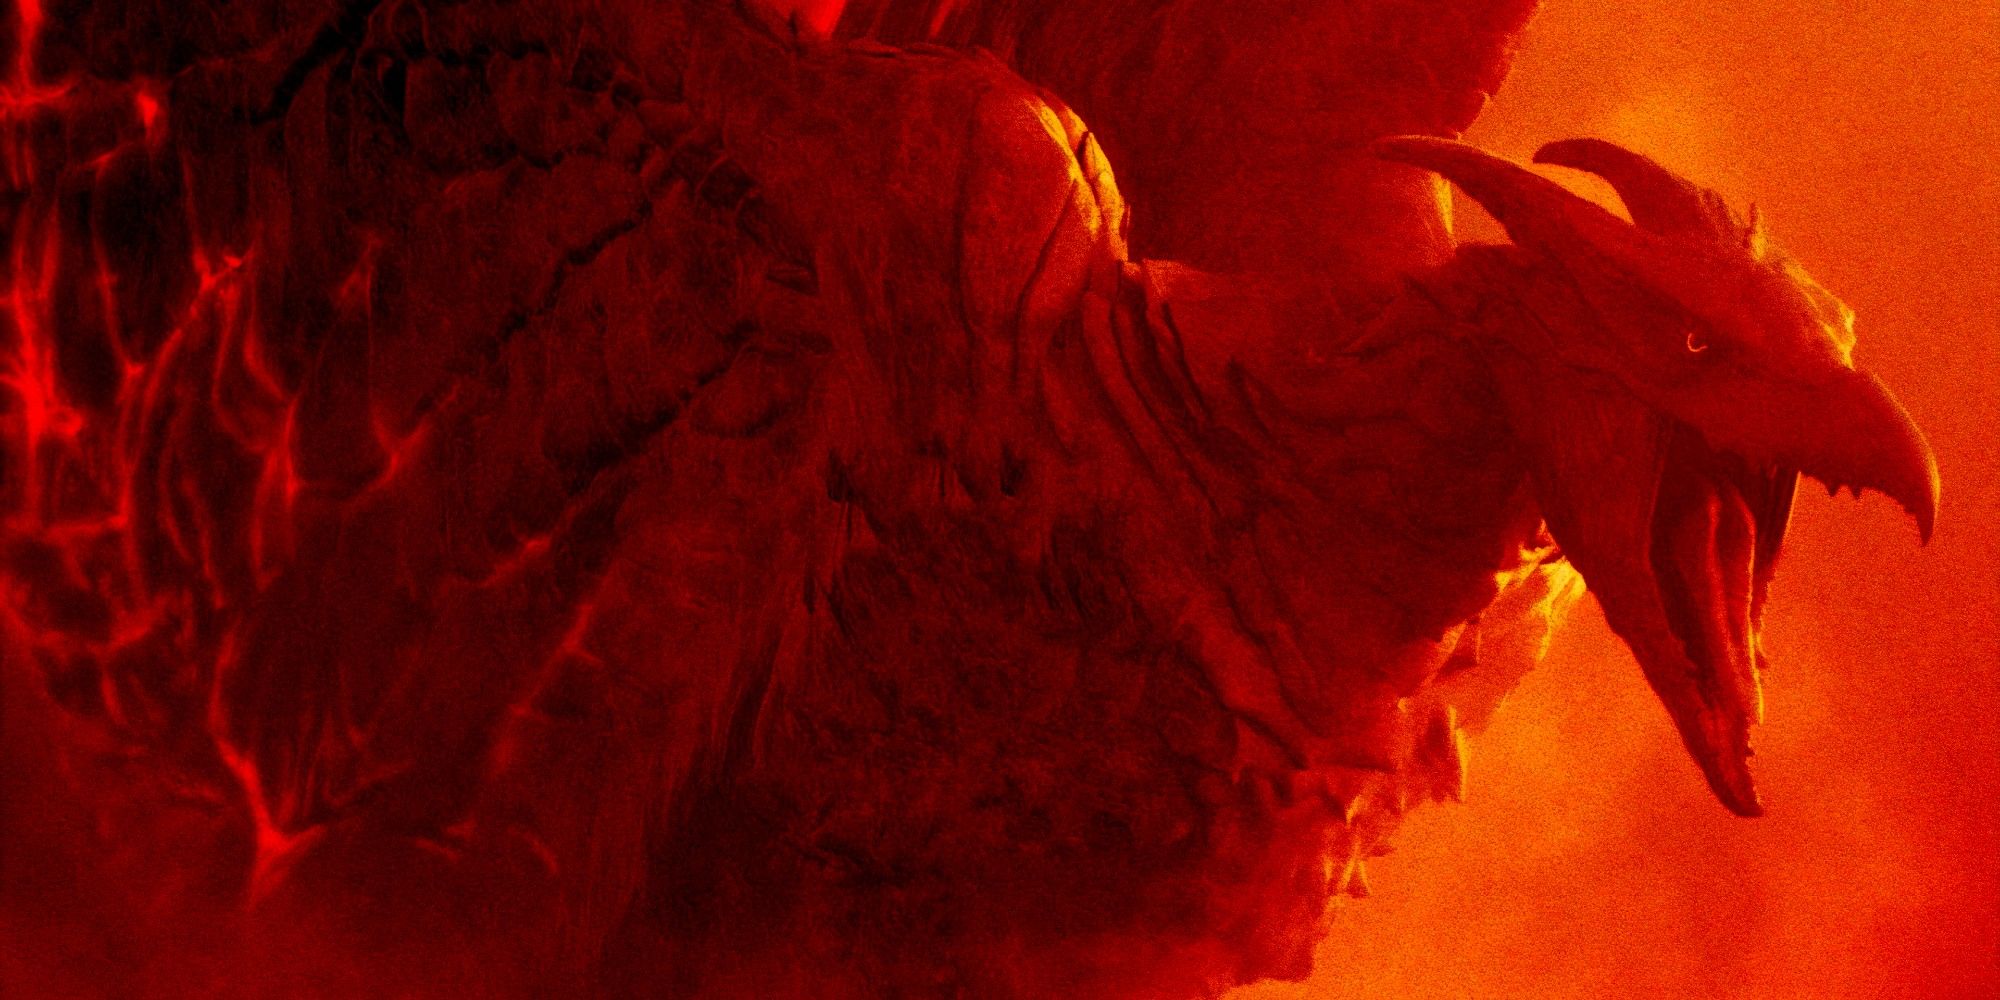 Rodan flying in a poster for Godzilla King of the Monsters